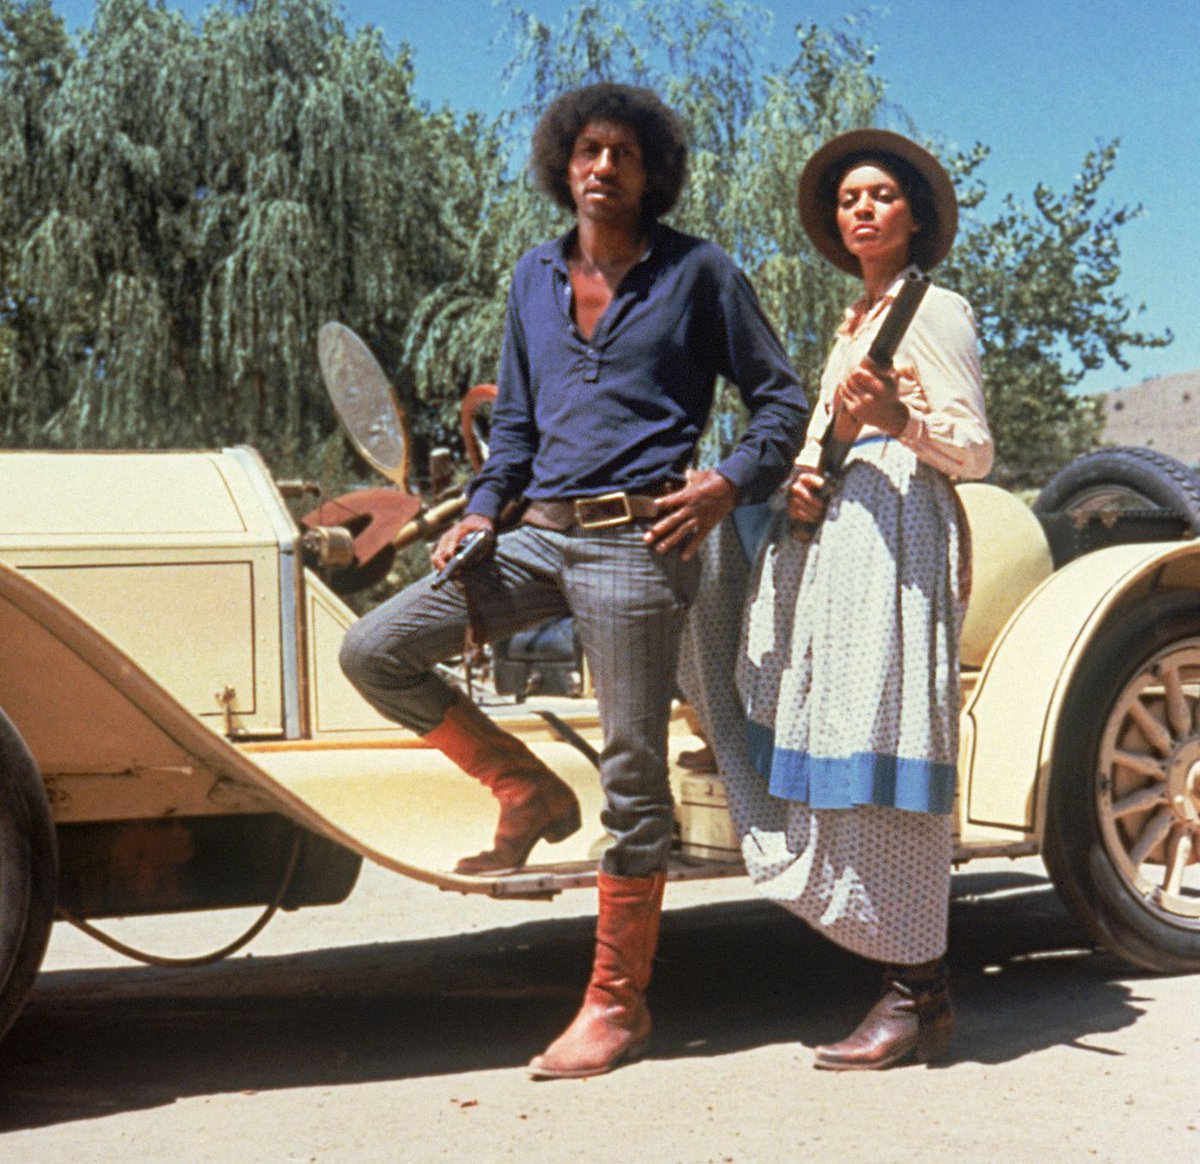 Vonetta McGee & Max Julien star as THOMASINE & BUSHROD (1974), screening next week, Wednesday & Thursday April 17th & 18th, on a 35mm double bill with BUCK AND THE PREACHER (1972). Tickets: buff.ly/3xXcQDx